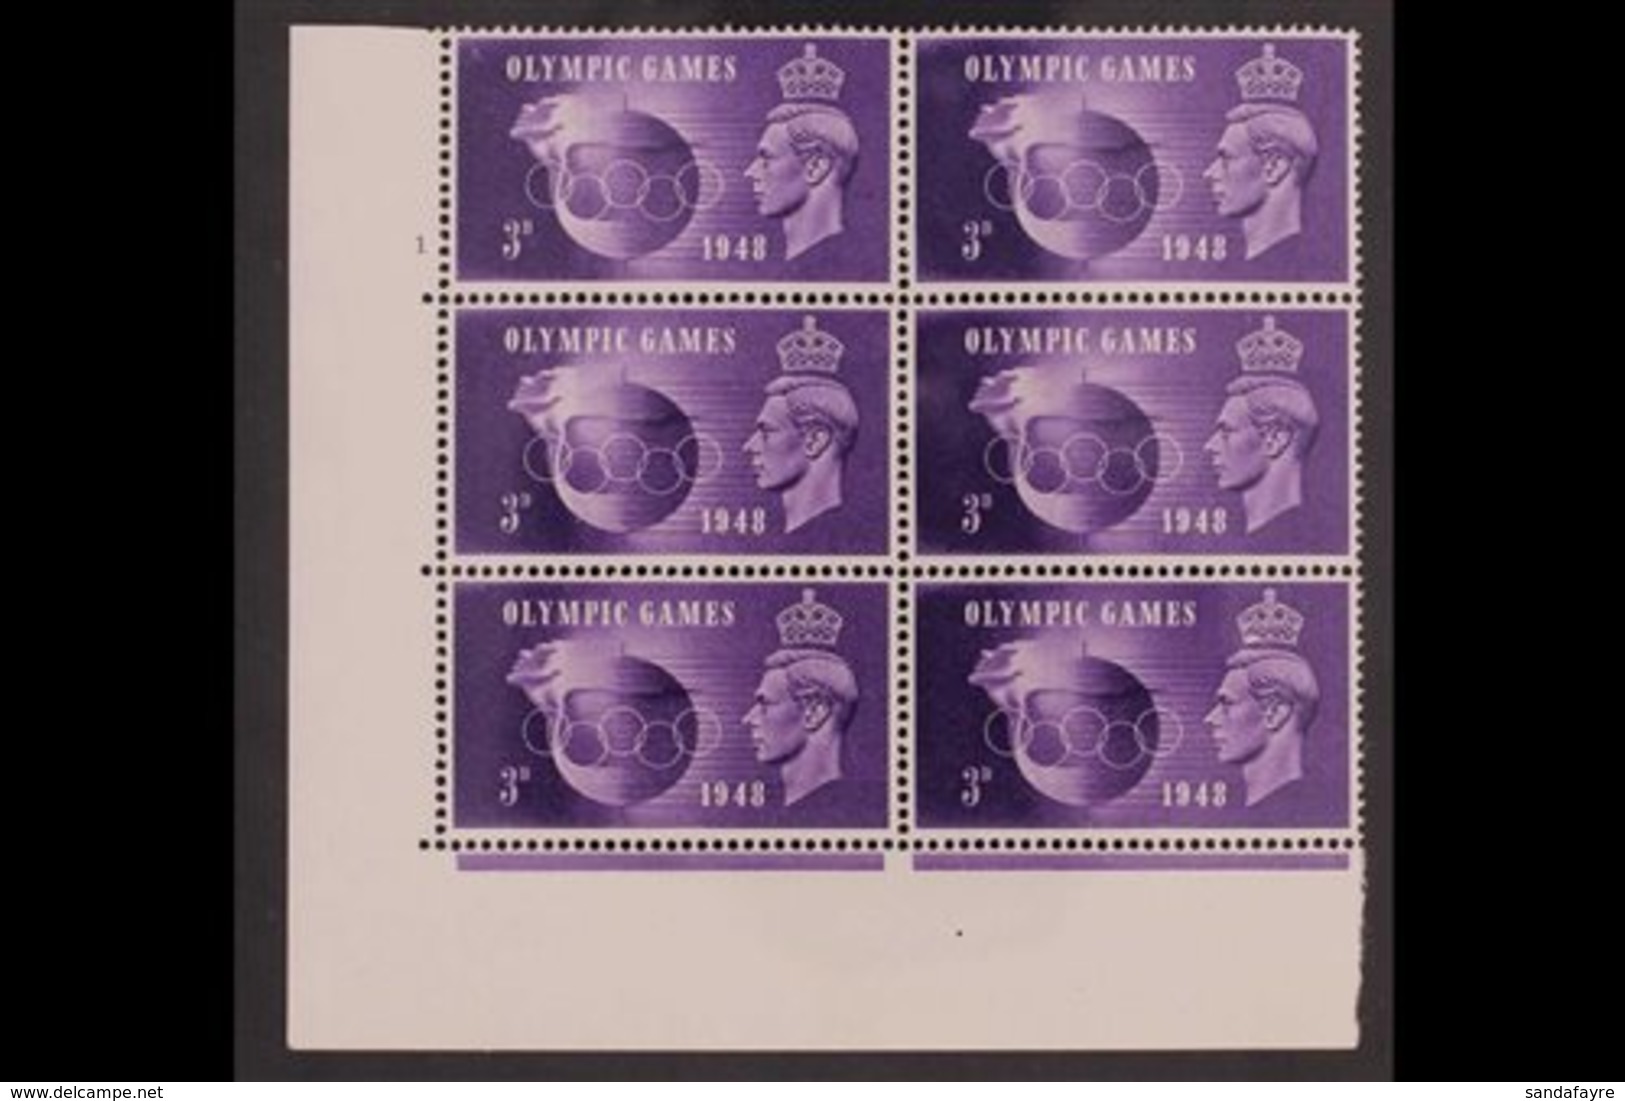 1948 3d Violet Olympics, SG 496, Never Hinged Mint Lower Left Corner Cylinder Number 1 BLOCK Of 6 With CROWN FLAW Positi - Unclassified